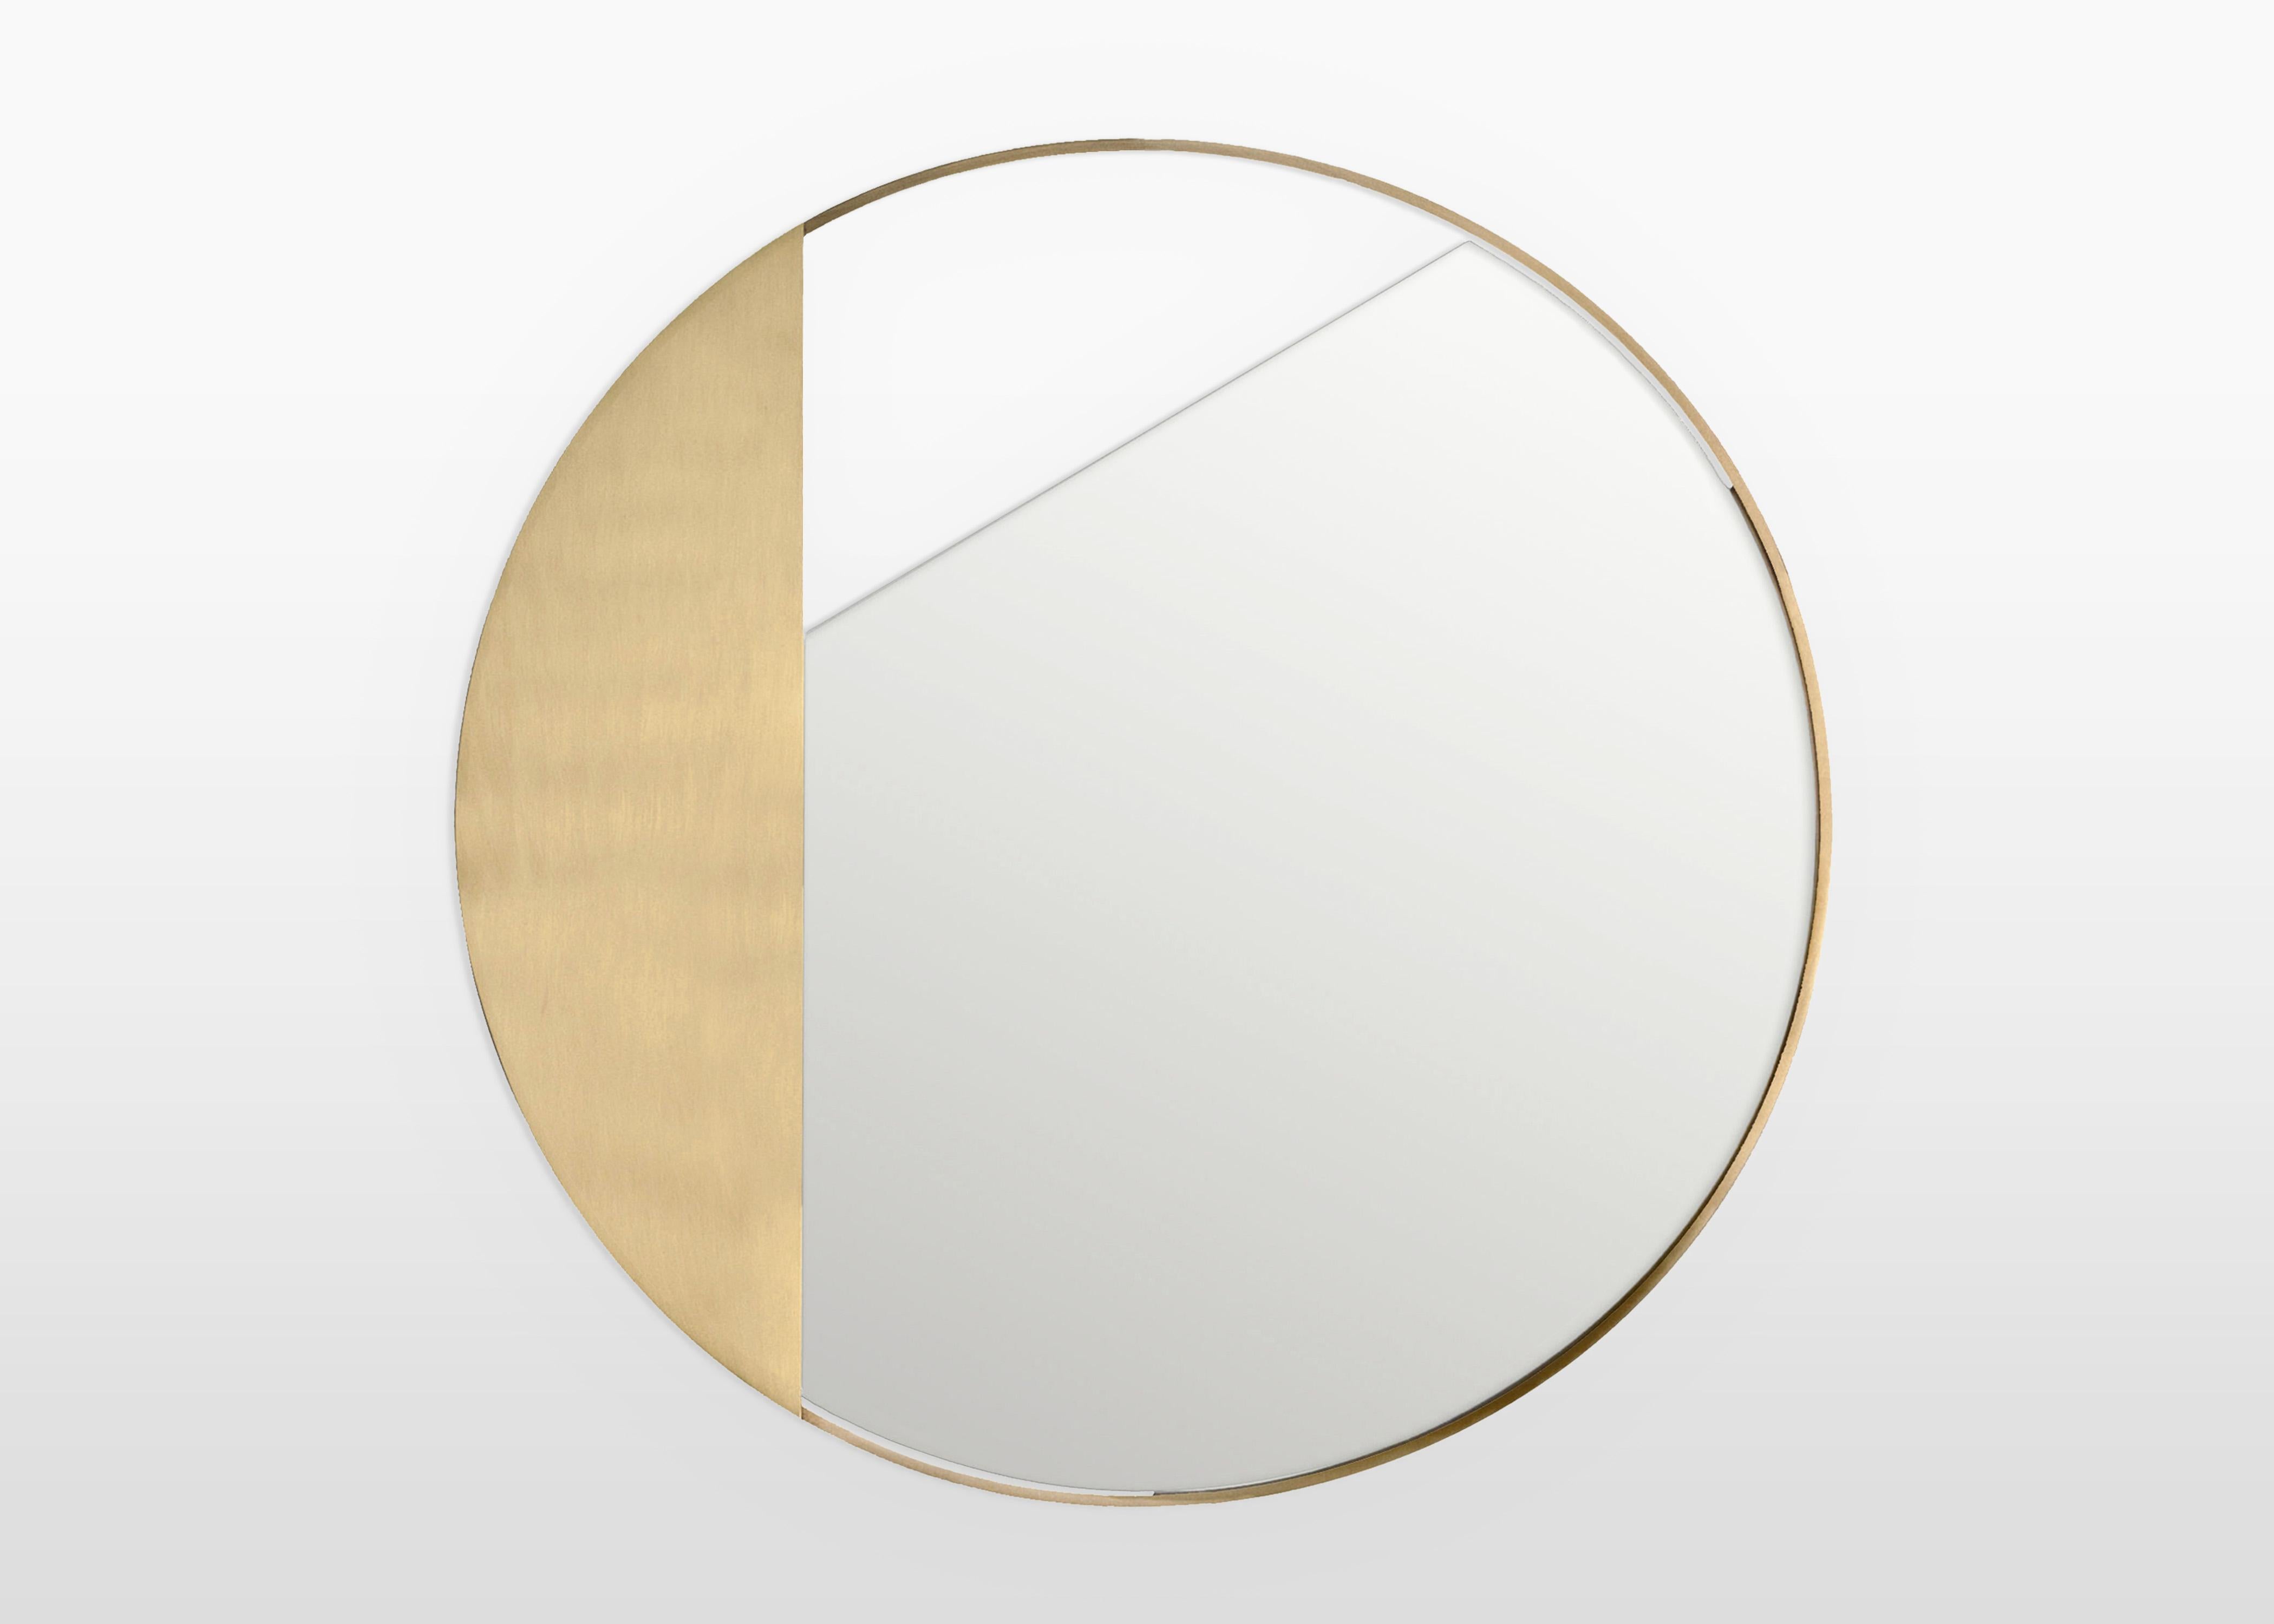 Edition mirror by Edizione Limitata
Limited Edition of 1000 pieces. Signed and numbered.
Designers: Simone Fanciullacci
Dimensions: Ø 90 cm
Materials: Brushed brass, mirror

Edizione Limitata, that is to say “Limited Edition”, is a brand promoting